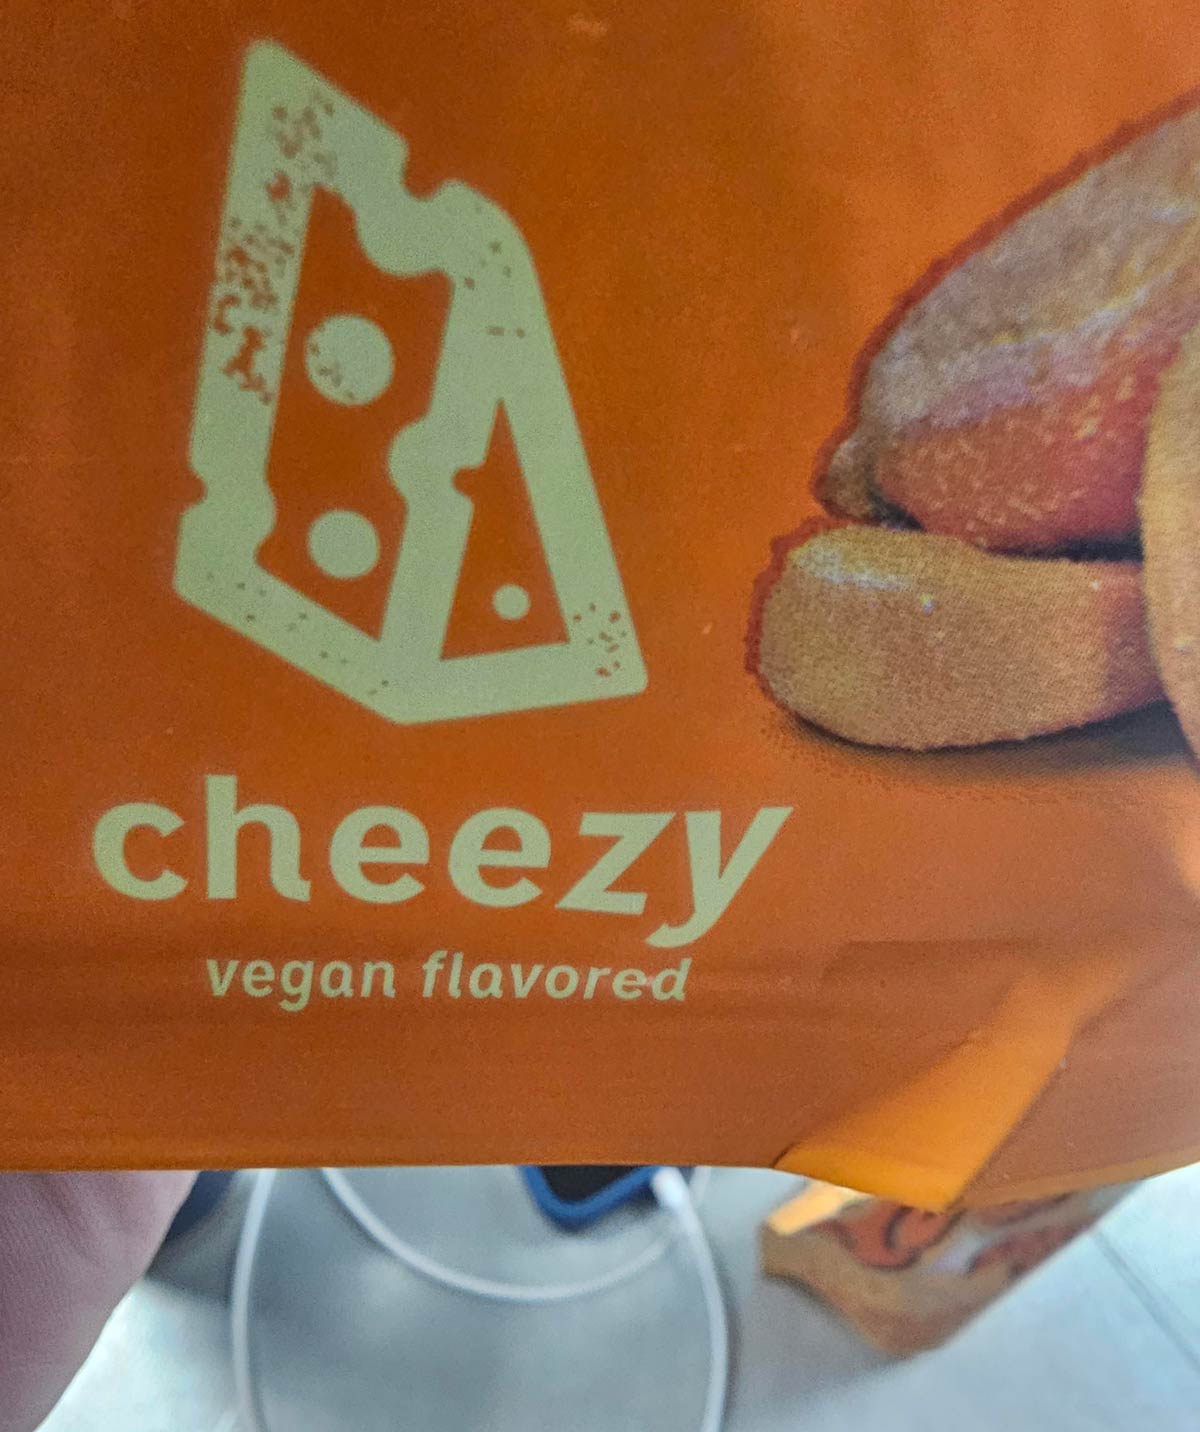 What part of the vegan provides flavoring?